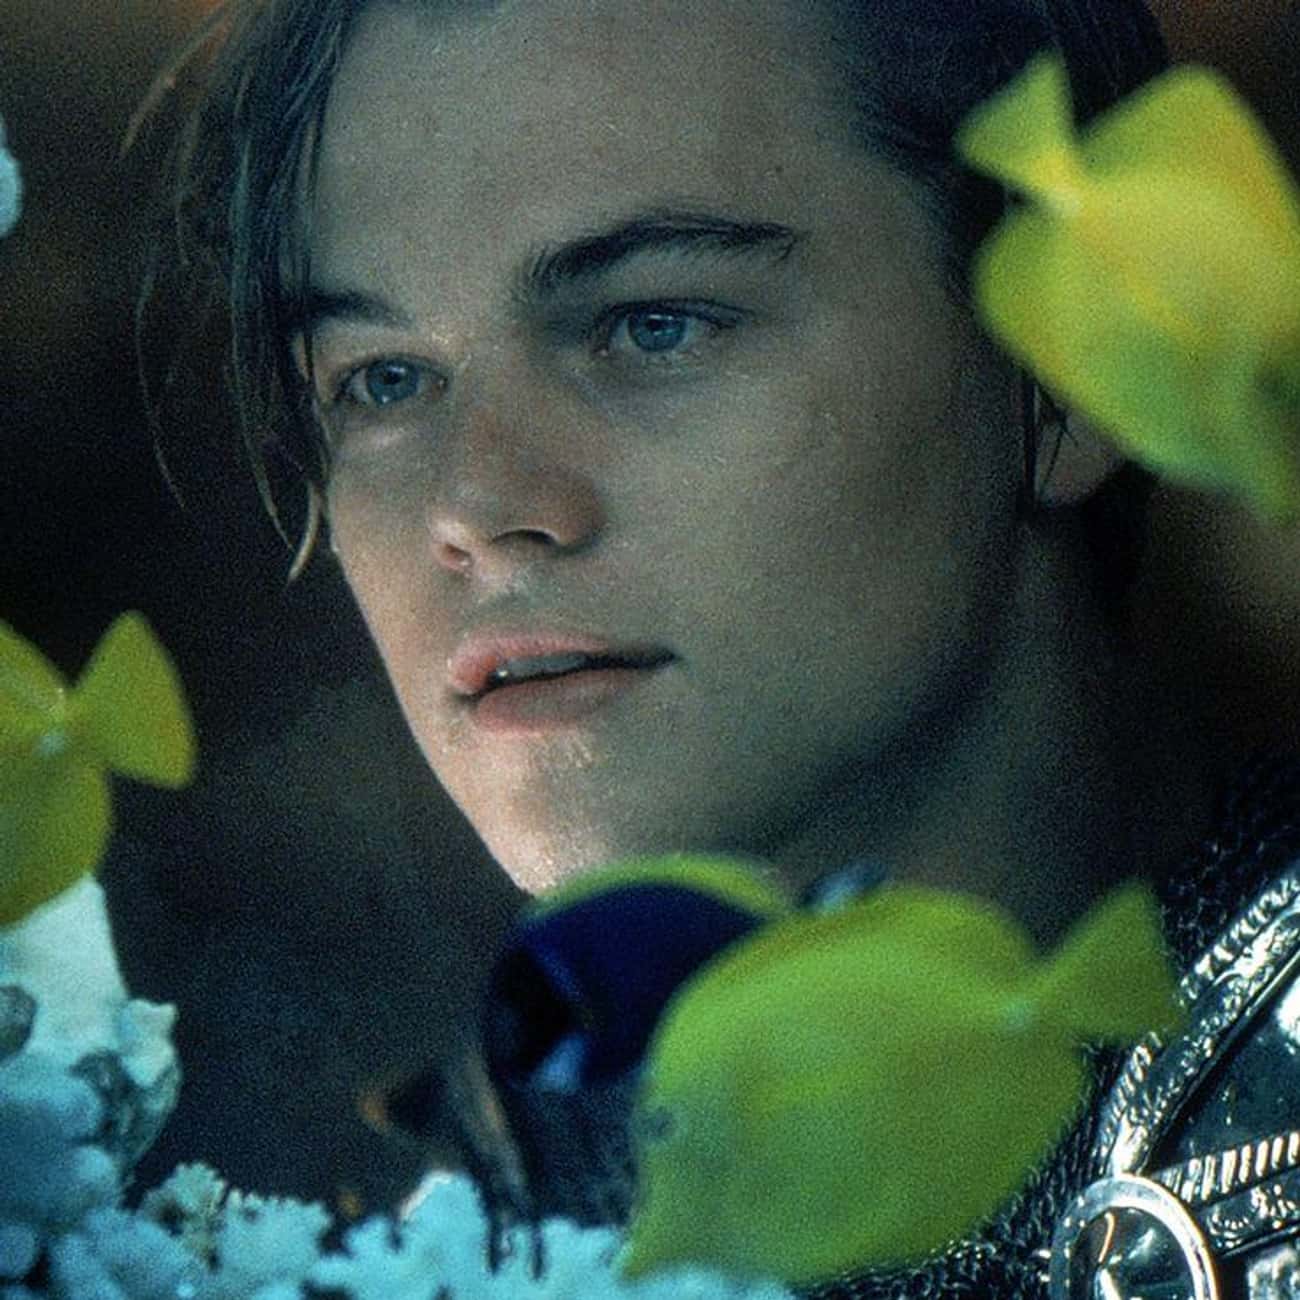 Aries (March 21 - April 19): Romeo From ‘Romeo + Juliet’